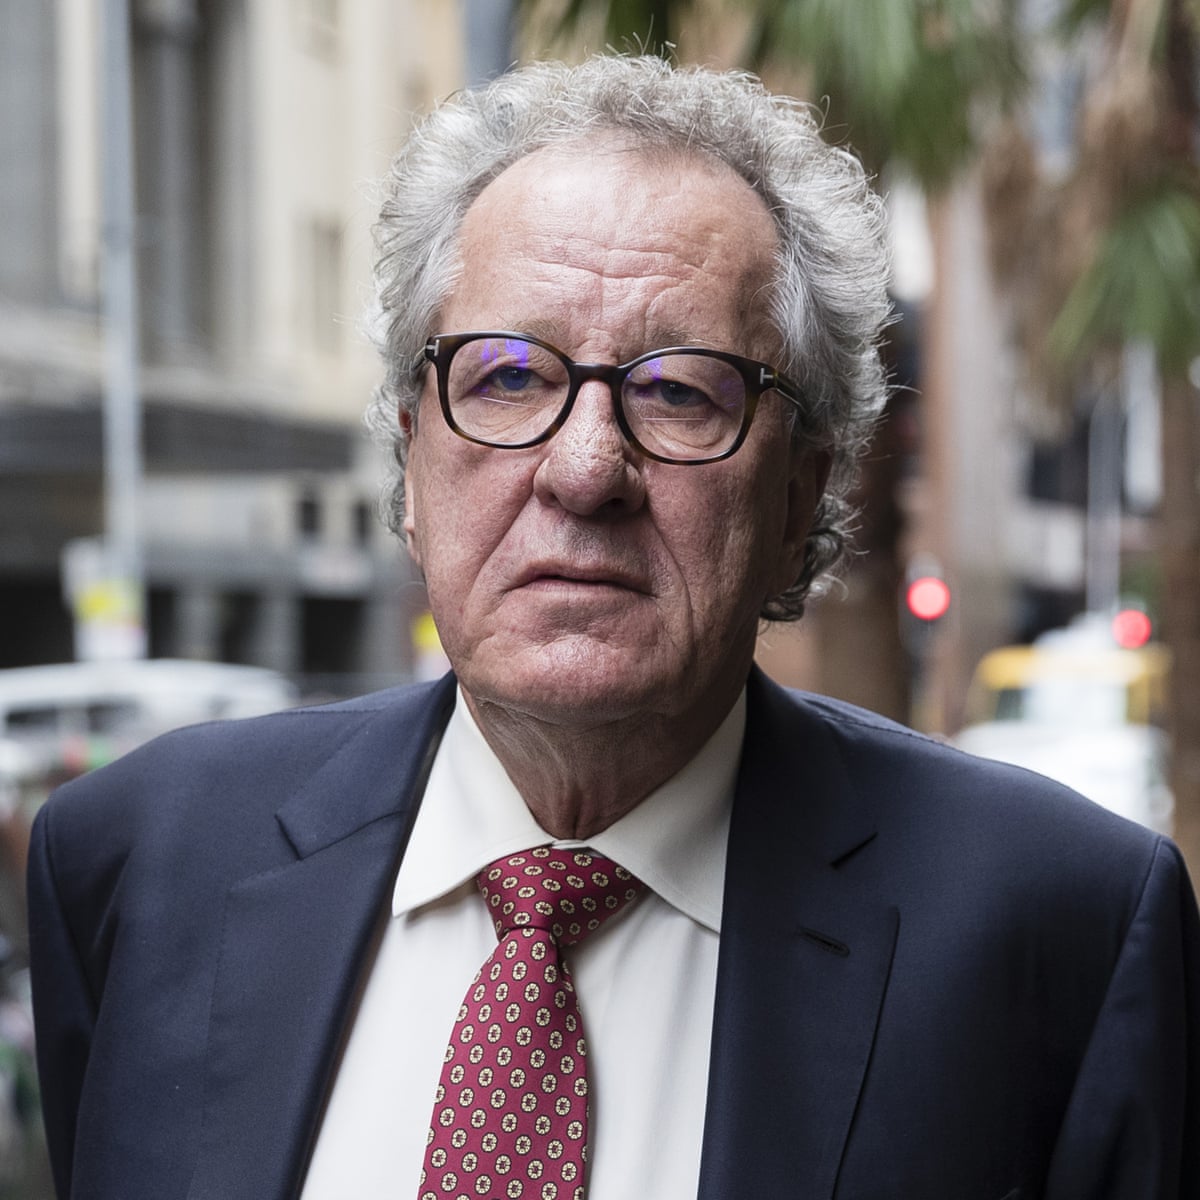 geoffrey Rush To Receive Record 29m Damages In Daily Telegraph Defamation Case Geoffrey Rush The Guardian